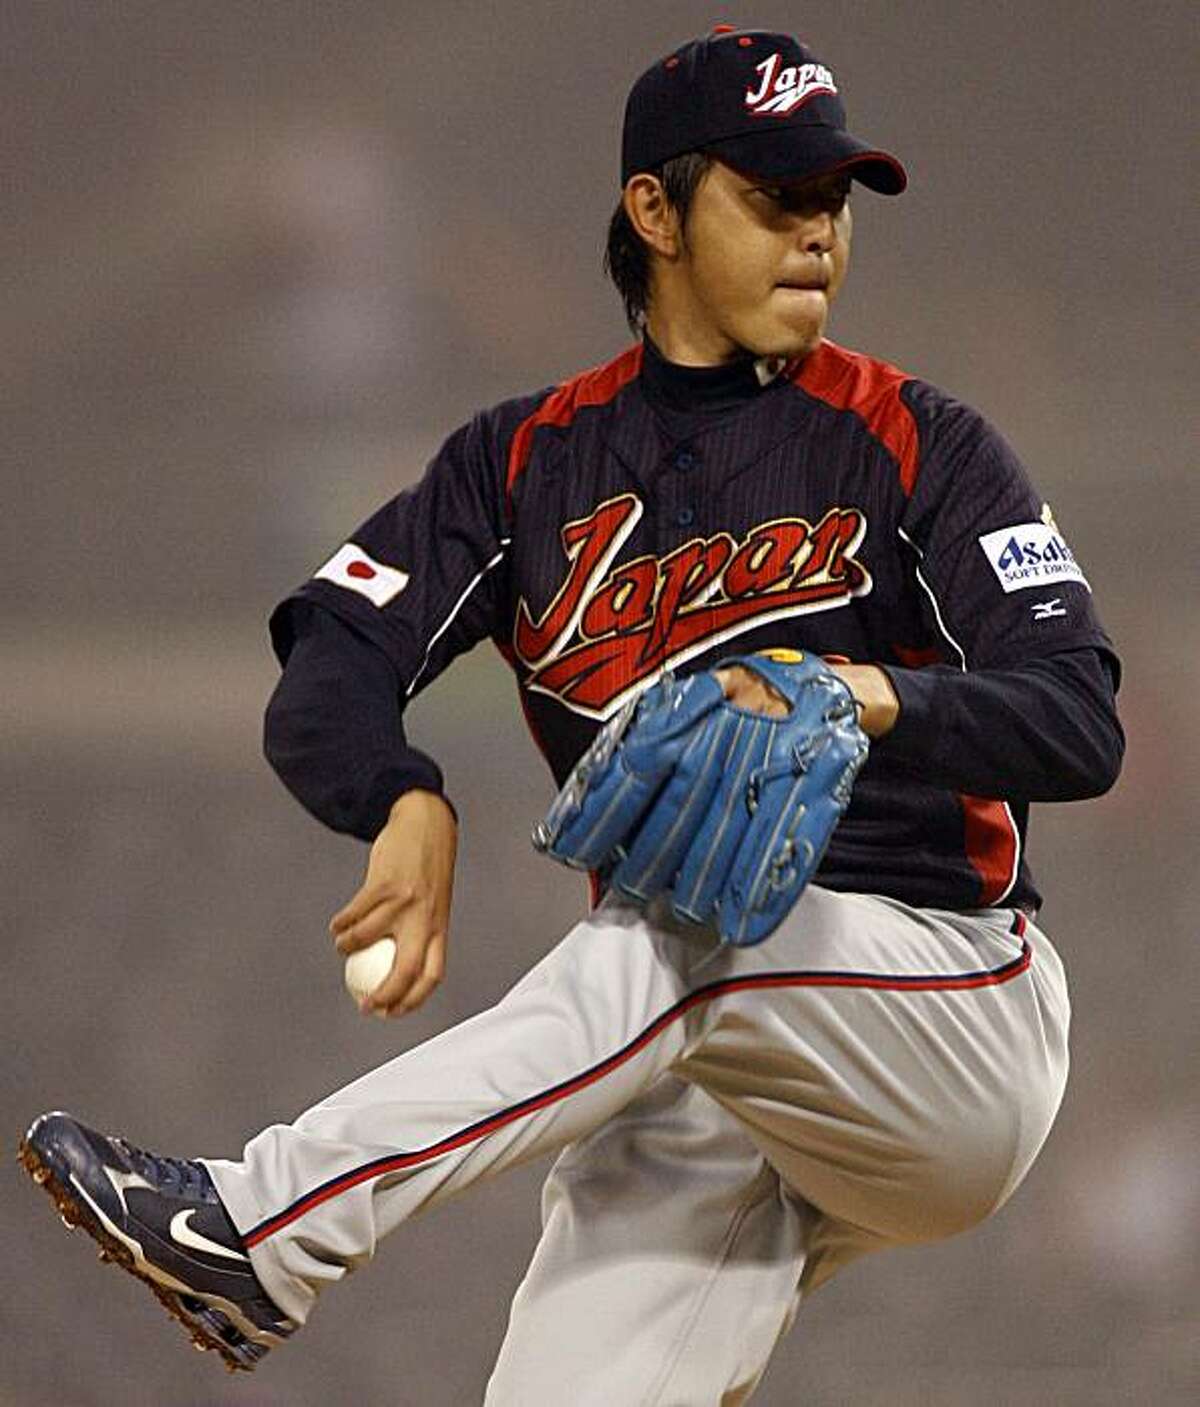 Japan starter Hisashi Iwakuma winds up to deliver a pitch during the sixth inning against Cuba during their World Baseball Classic game in San Diego Wednesday, March 18, 2009. (AP Photo/Denis Poroy)